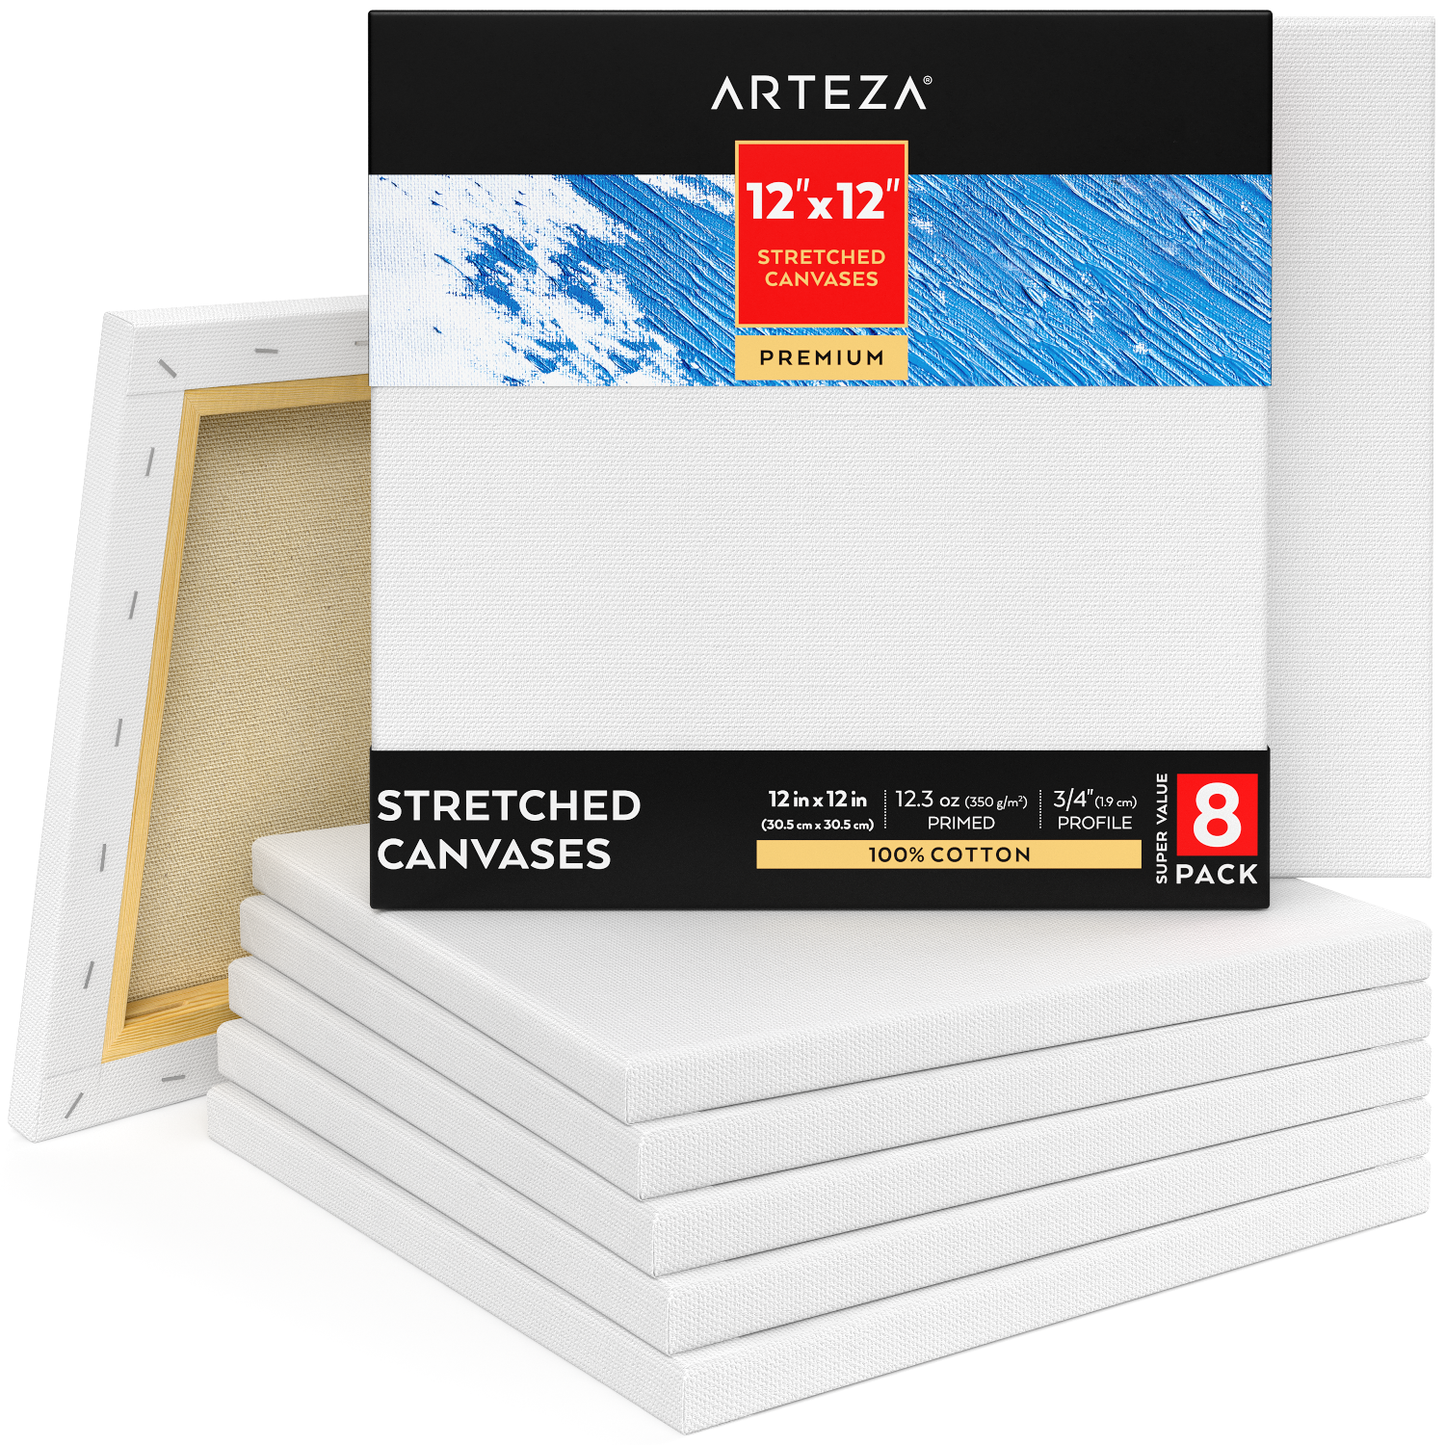 Premium Stretched Canvas, 12" x 12" - Pack of 8